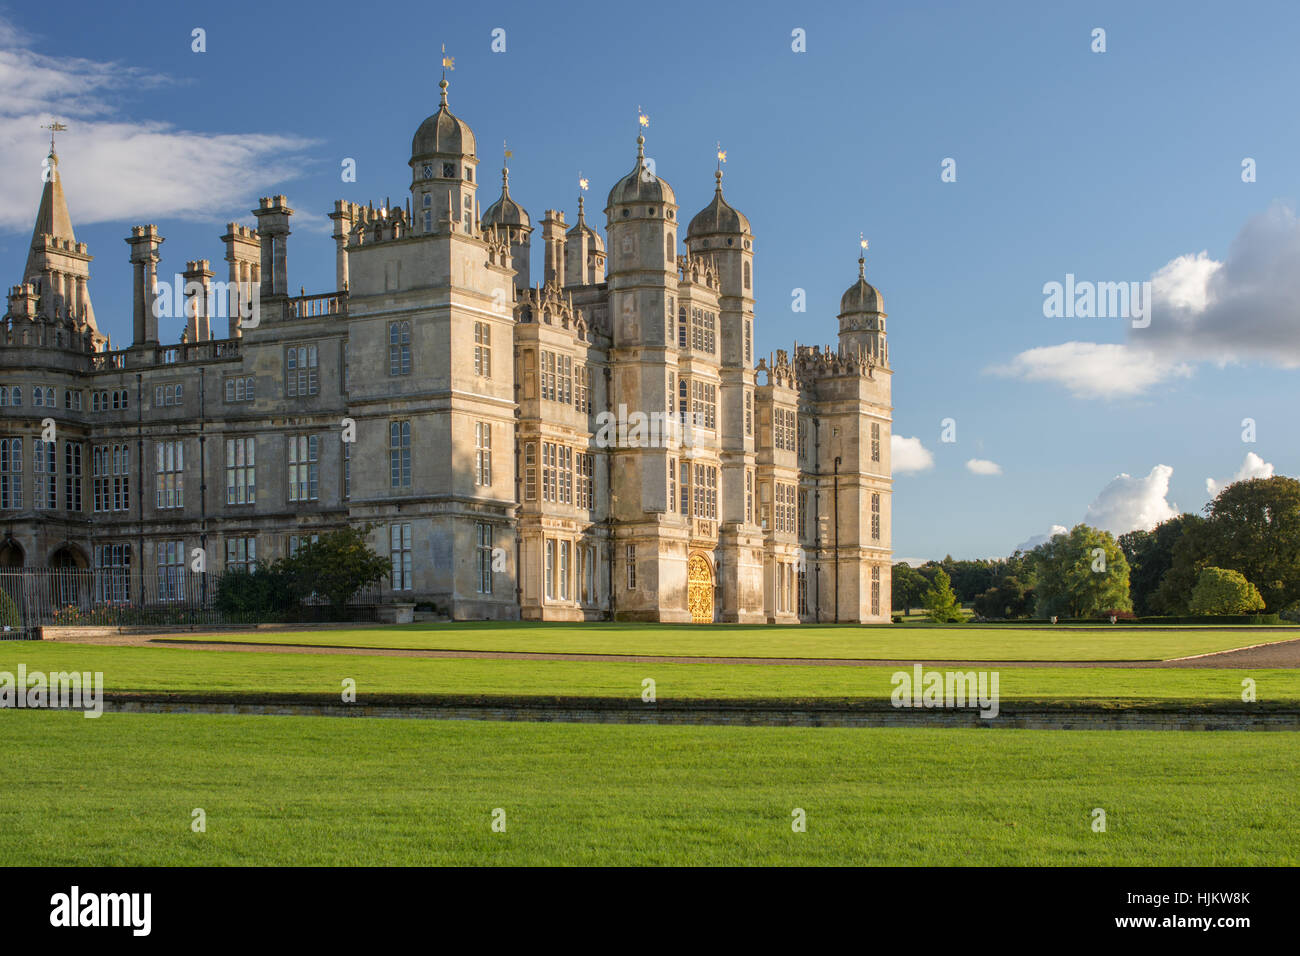 Burghley House, Stamford, Lincolnshire Banque D'Images